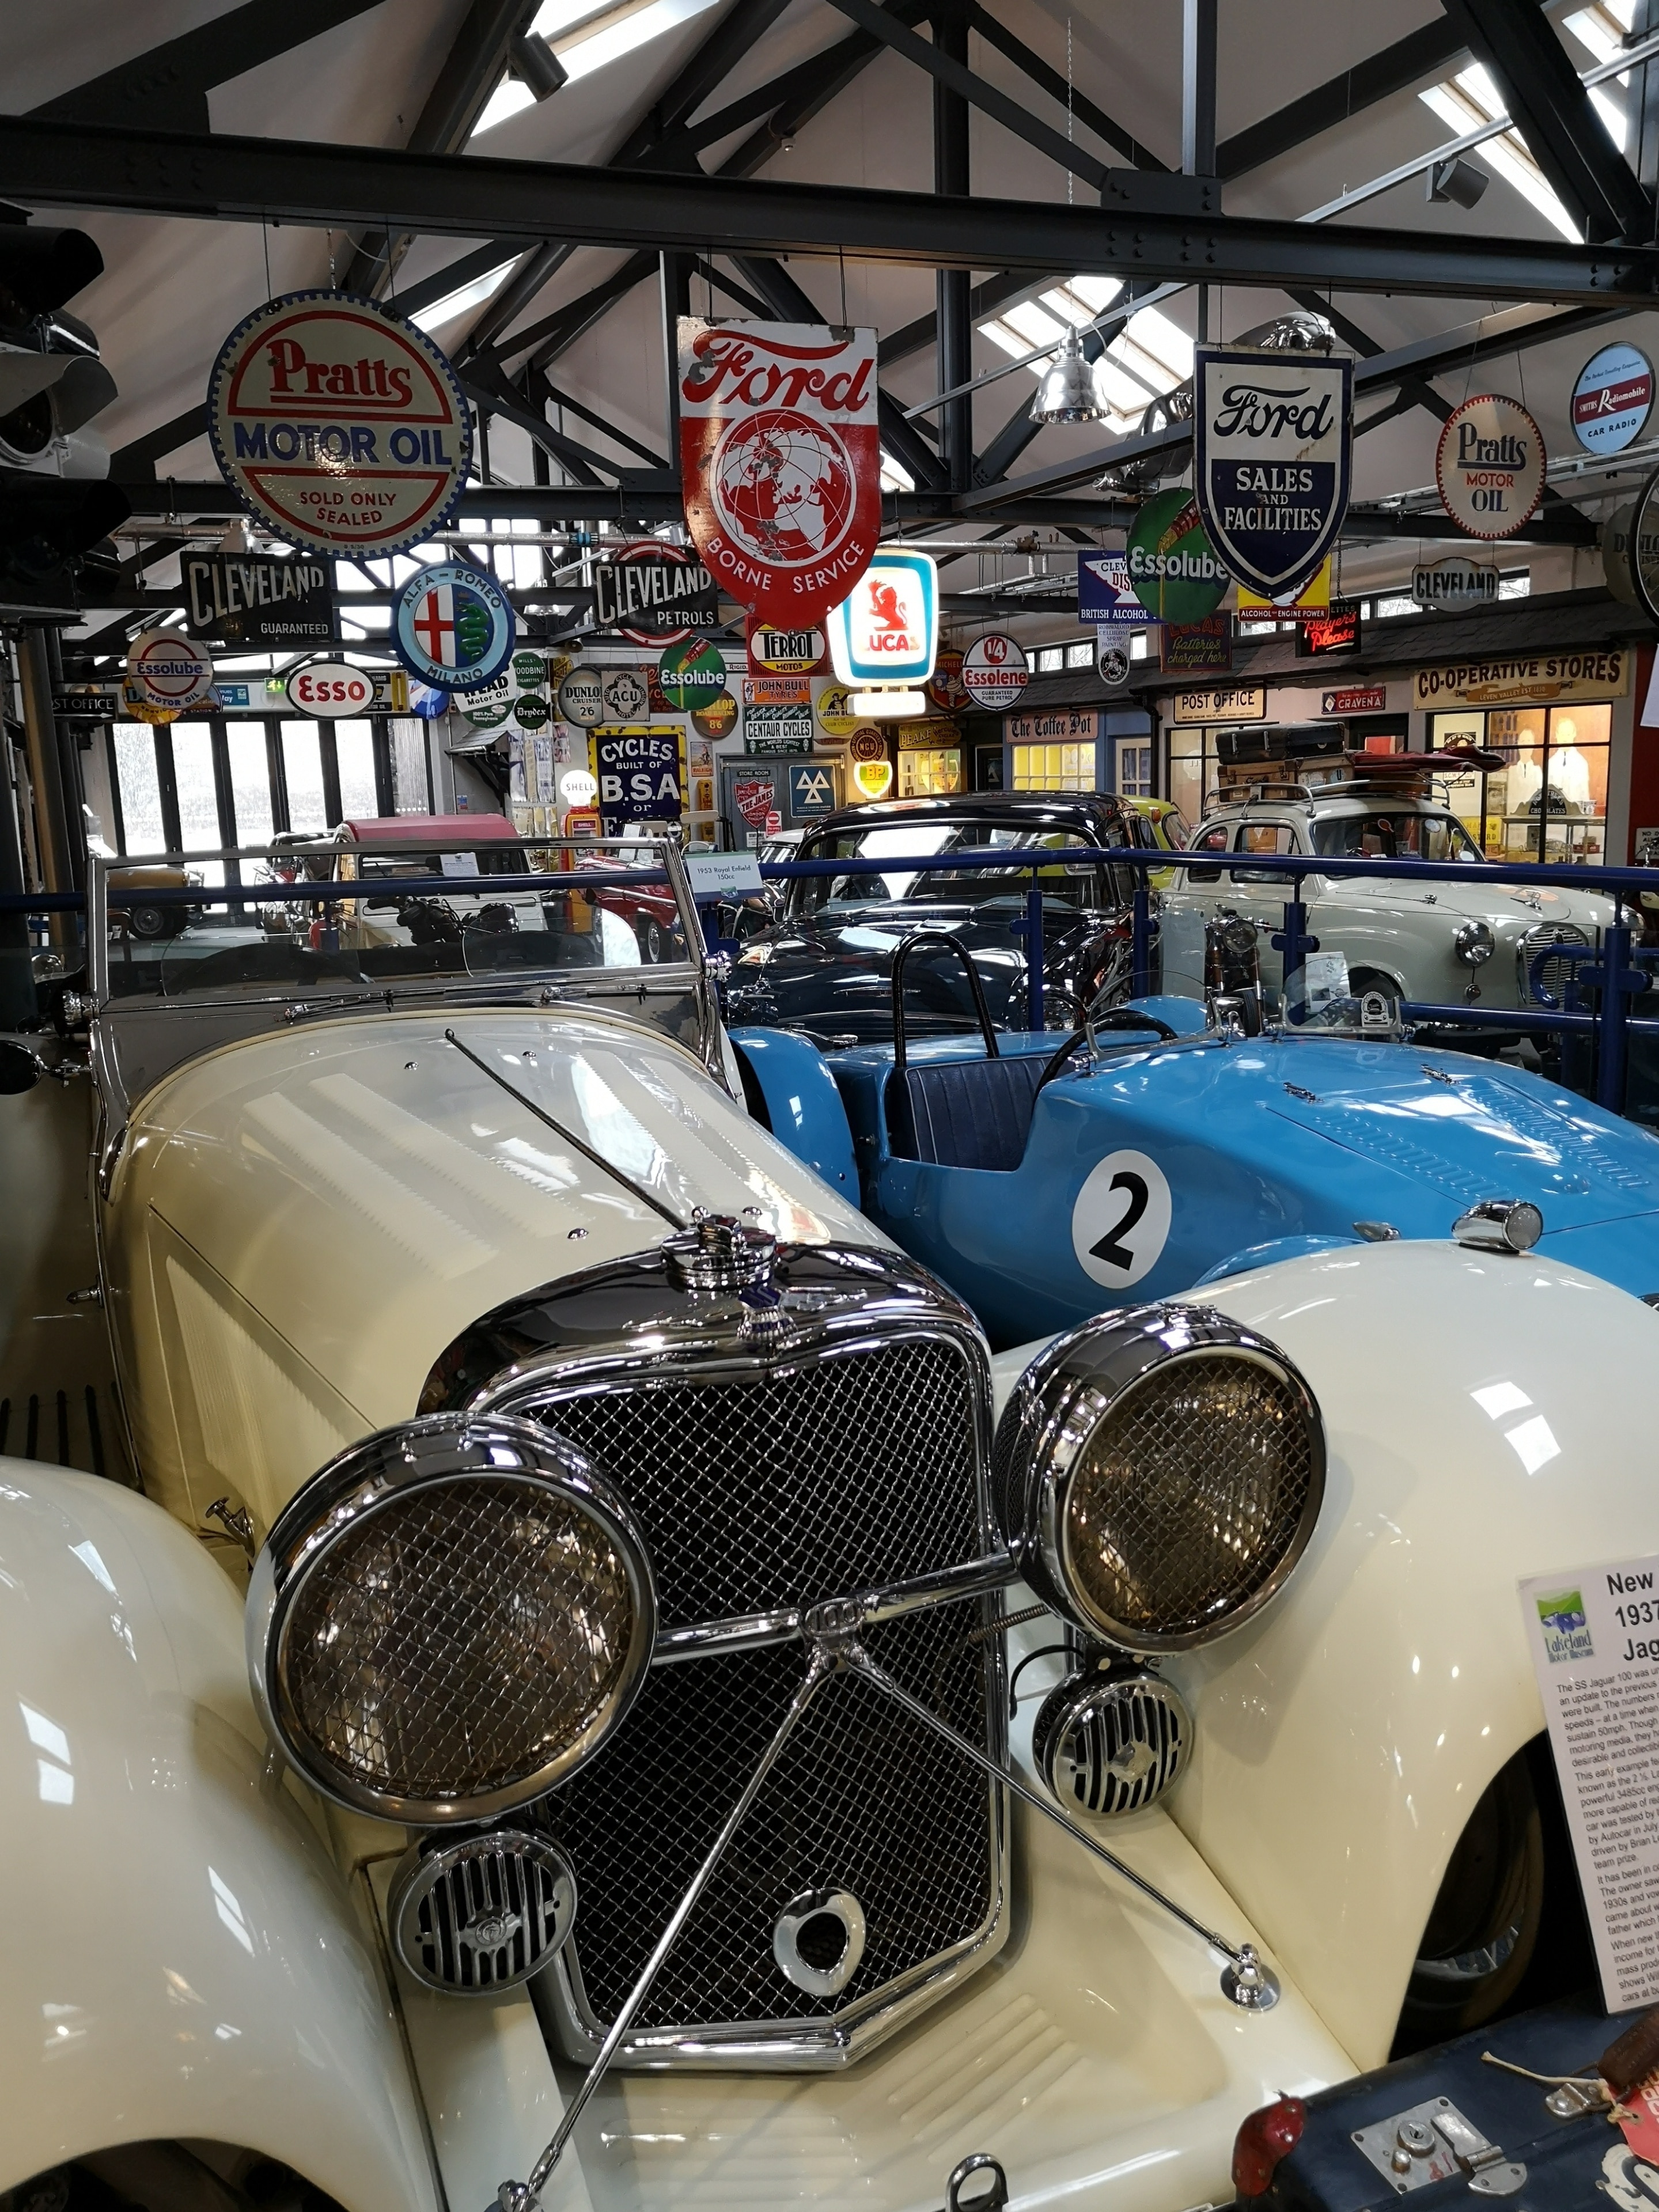 In inclement weather the Motor Museum is a great place to visit. Exhibits include all manner of classic cars, bicycles, motorcycles, vintage shop memorabilia and a Donald Campbell Bluebird exhibition. There's a large cafe too and all are dog friendly. 